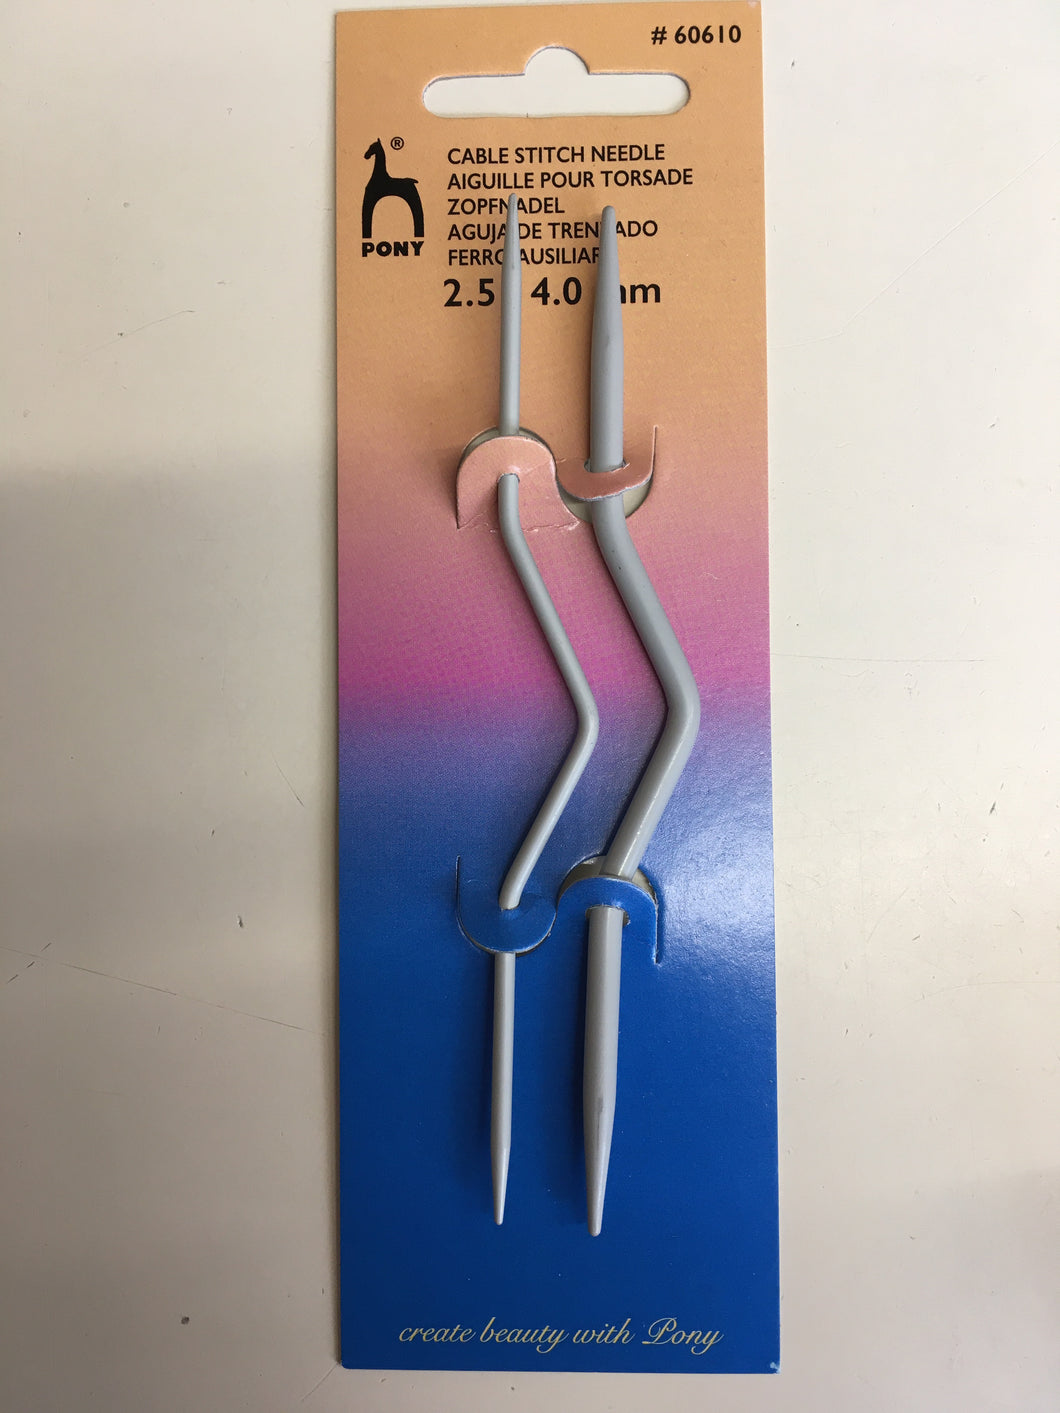 Cable stitch needle 2.5 - 4mm